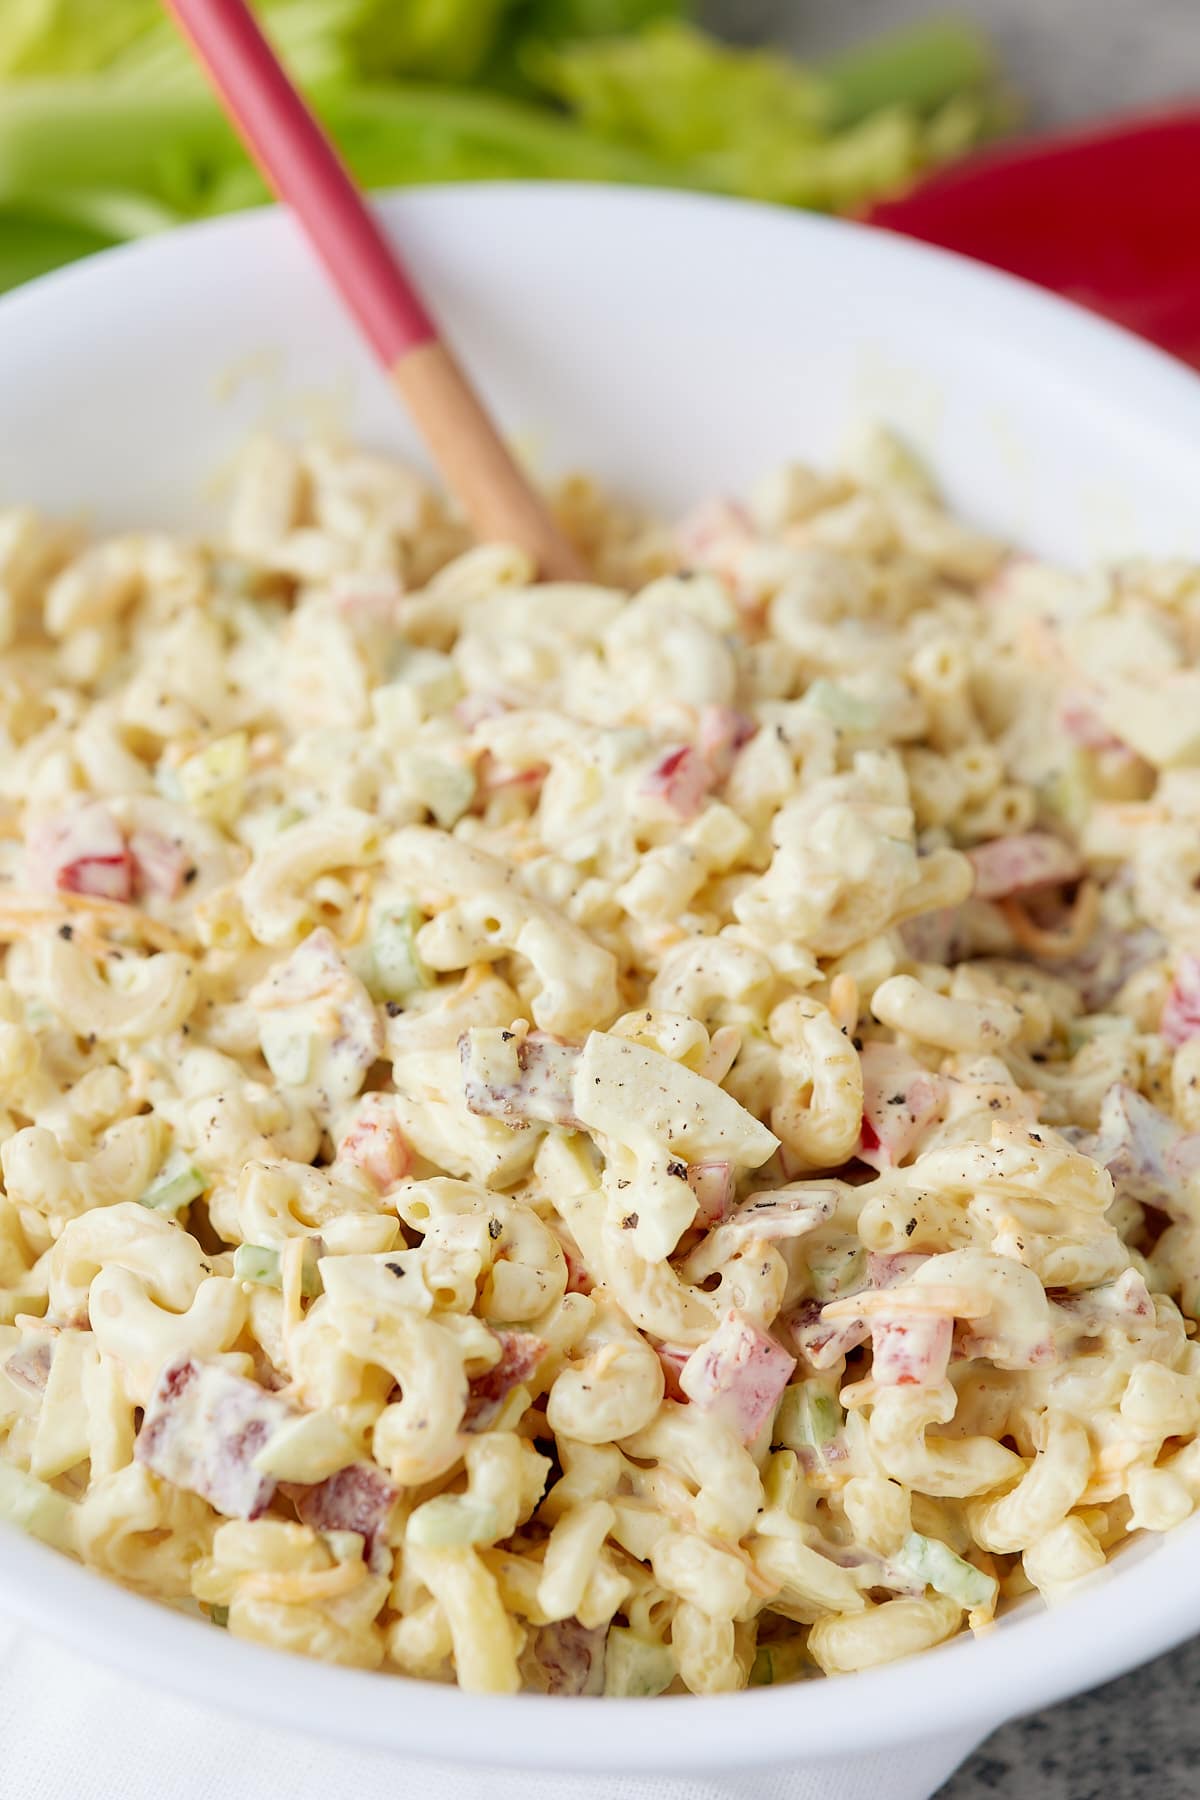 Southern macaroni pasta salad served in a white bowl.